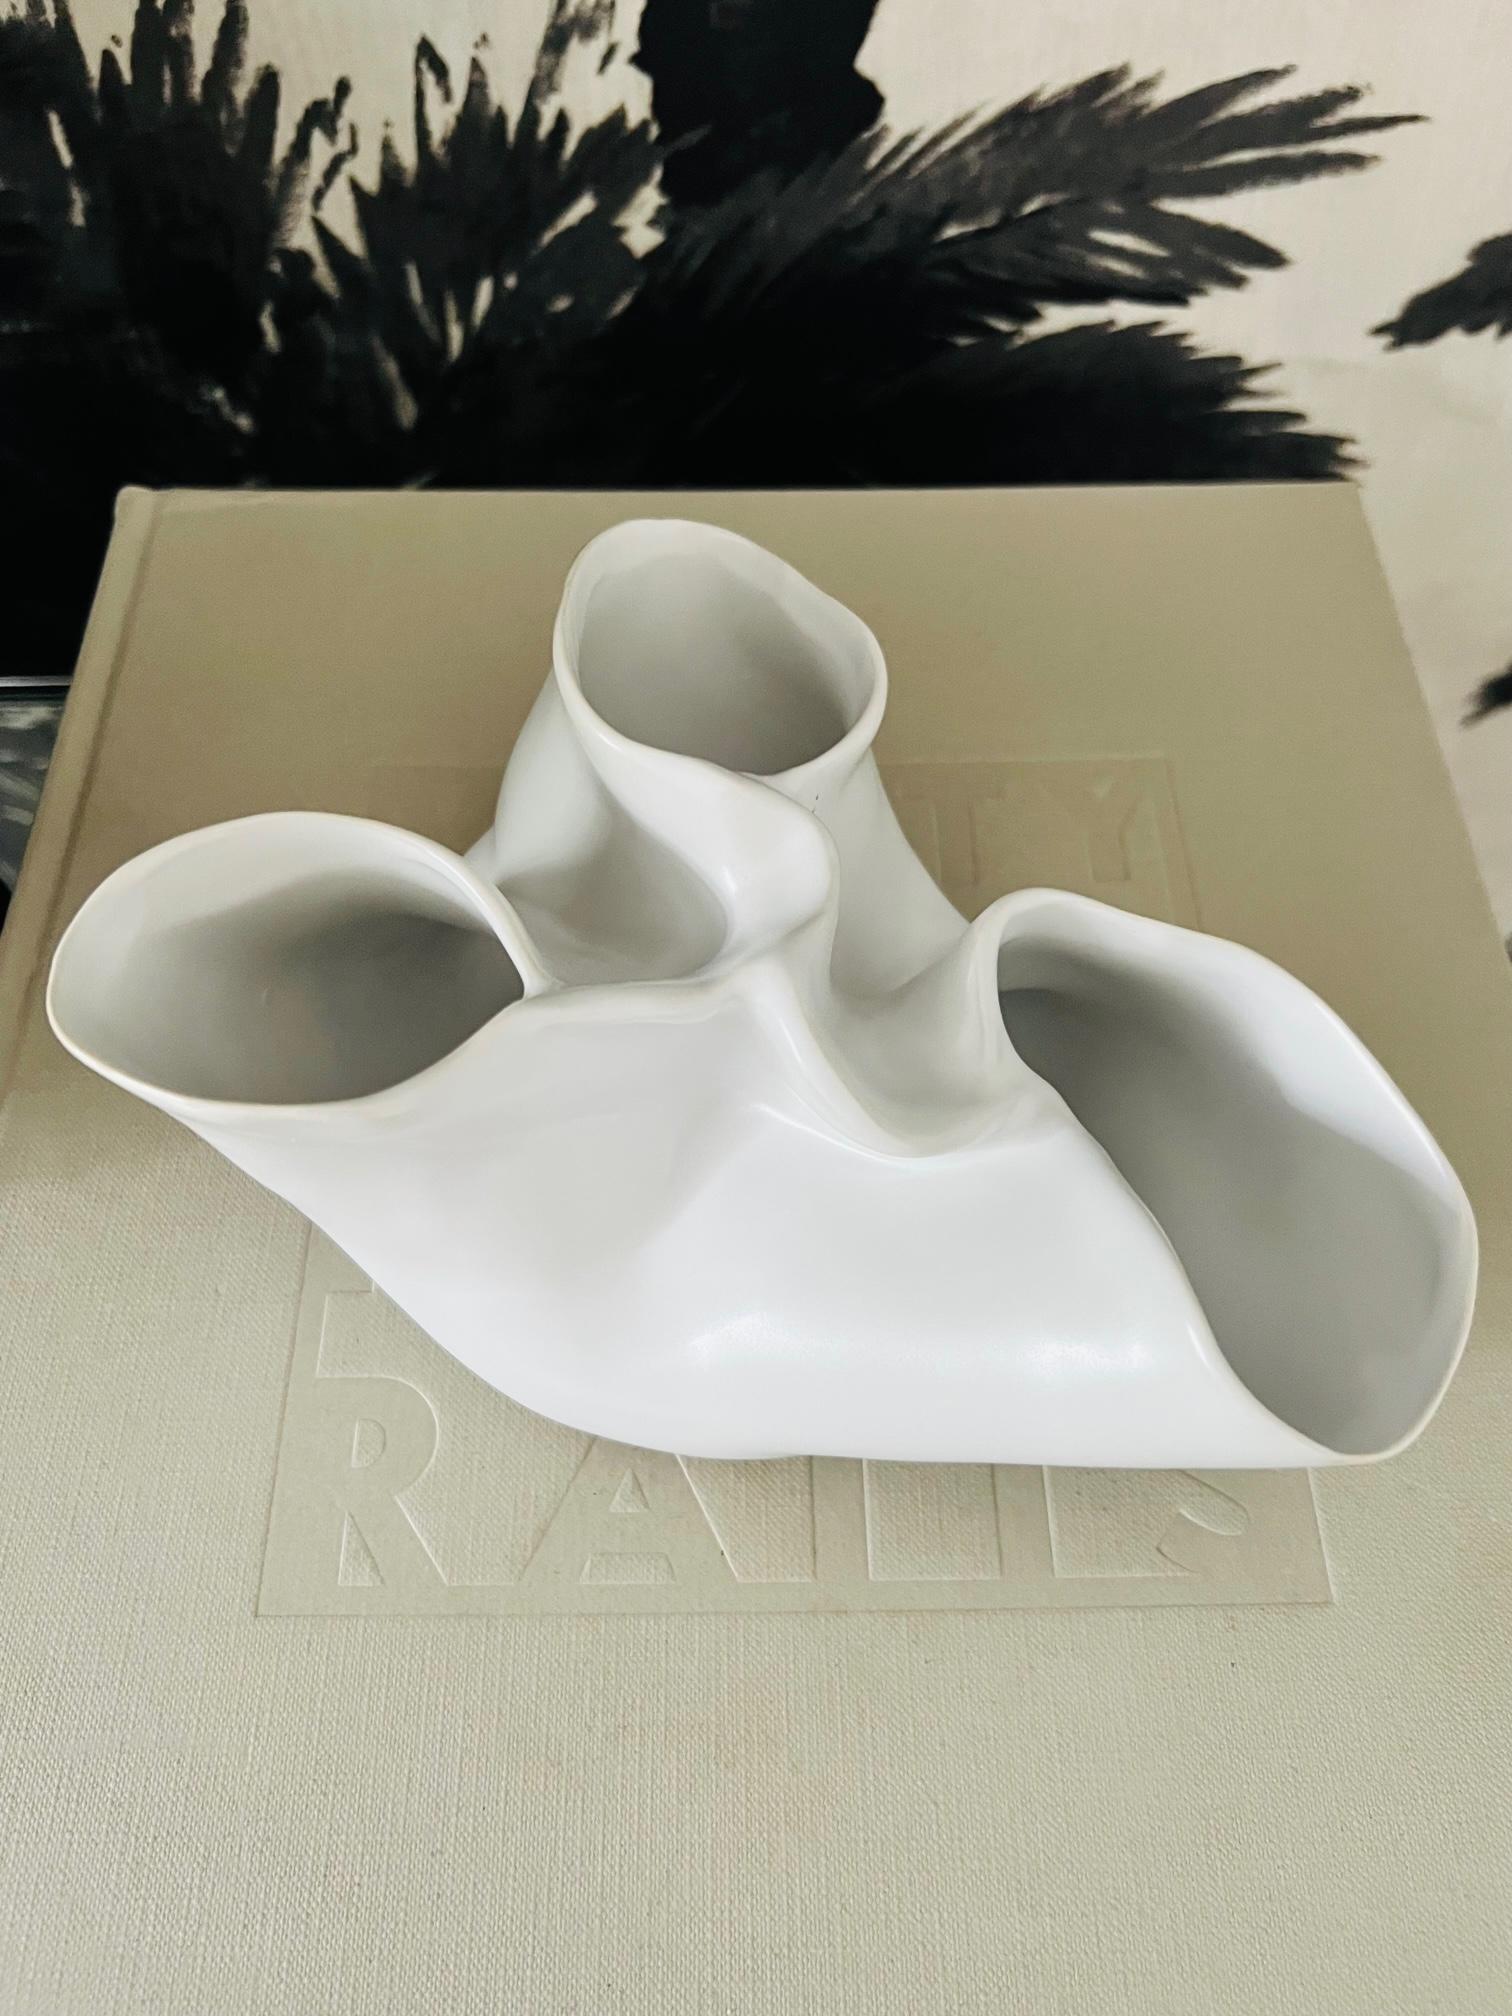 Abstract Vase with Organic Heart Muscle and Valve Design in White Ceramic In Good Condition For Sale In Fort Lauderdale, FL